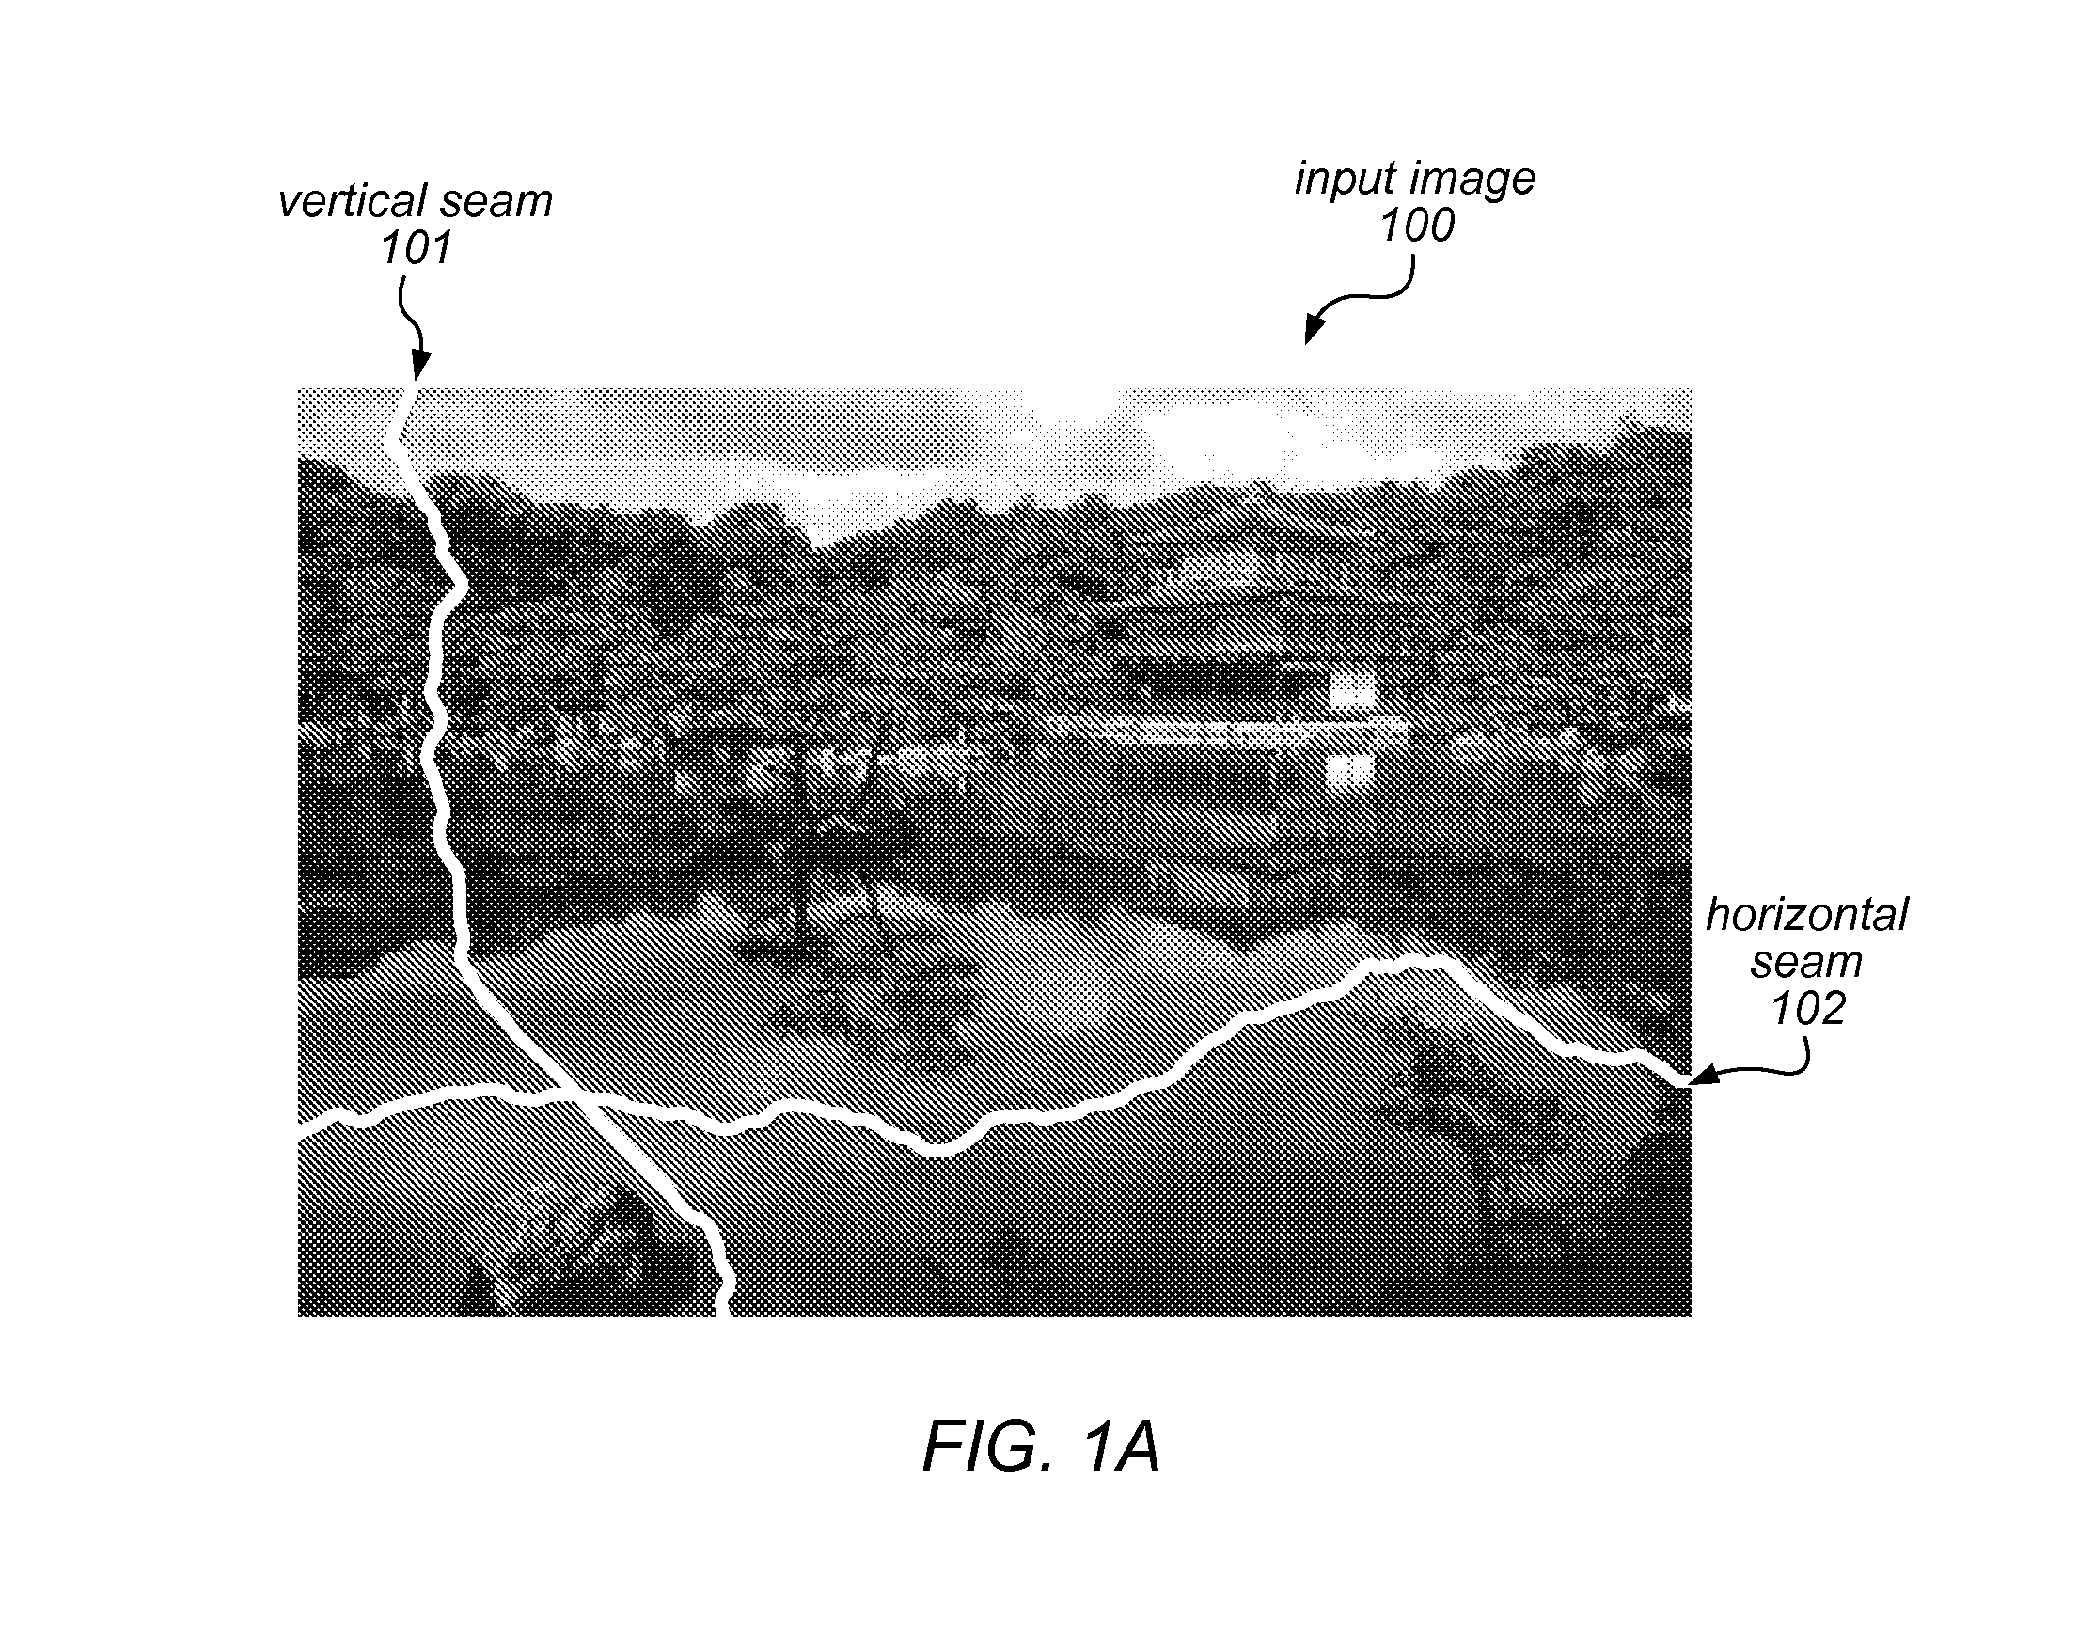 System and method for content aware hybrid cropping and seam carving of images